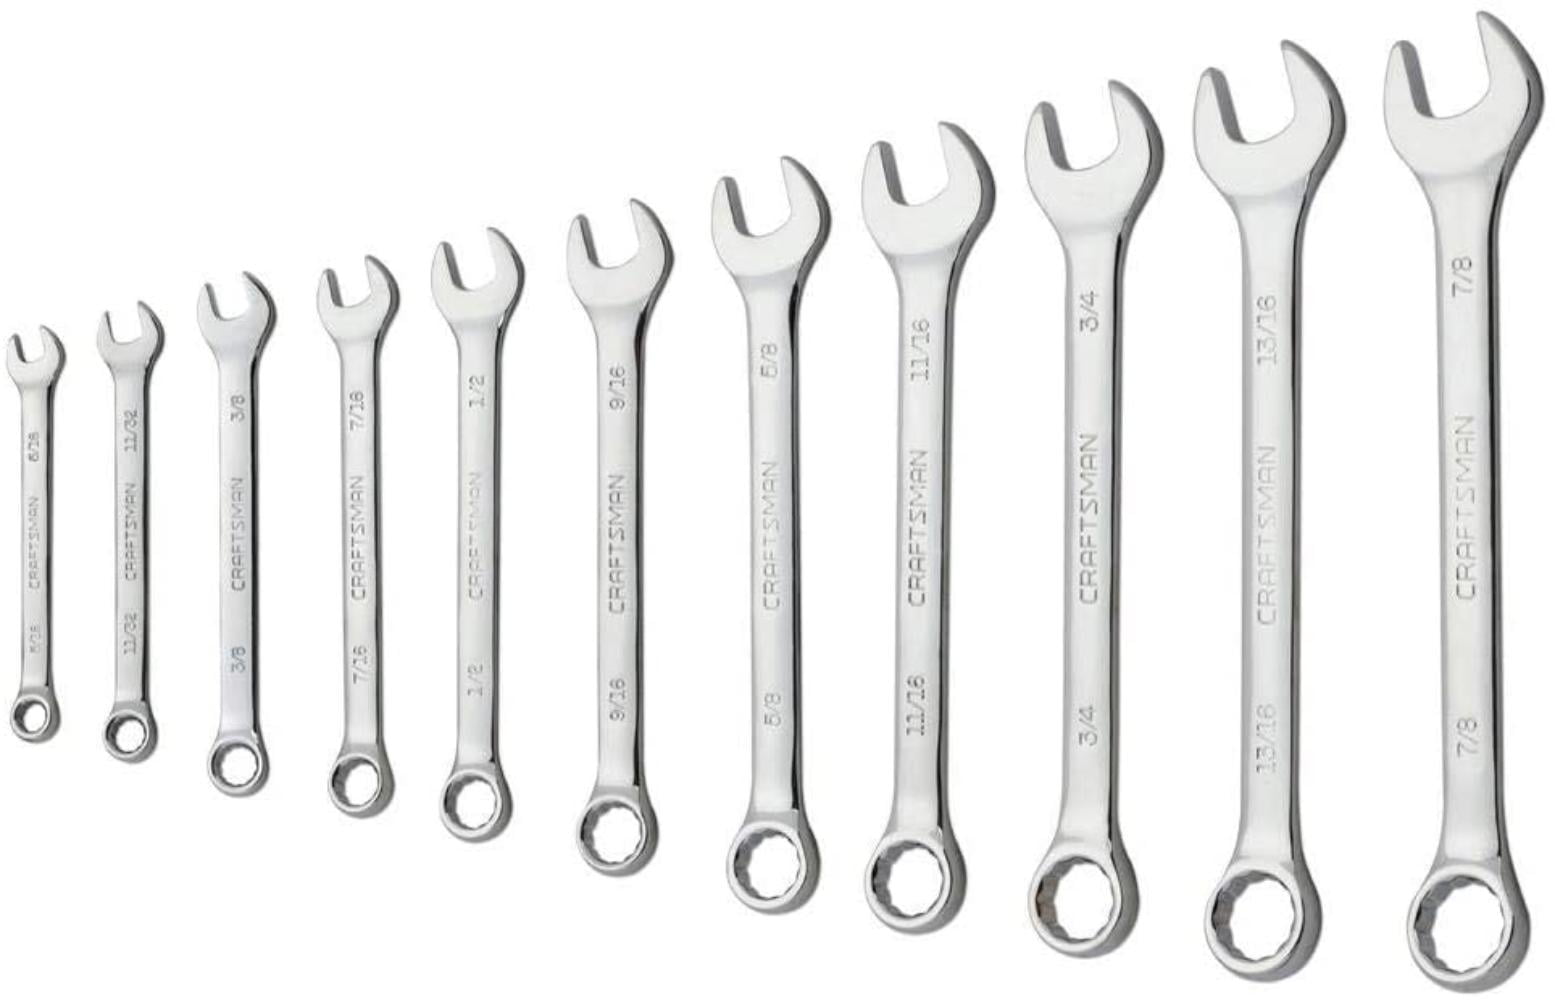 Inches SAE Craftsman 11 piece combination wrench set